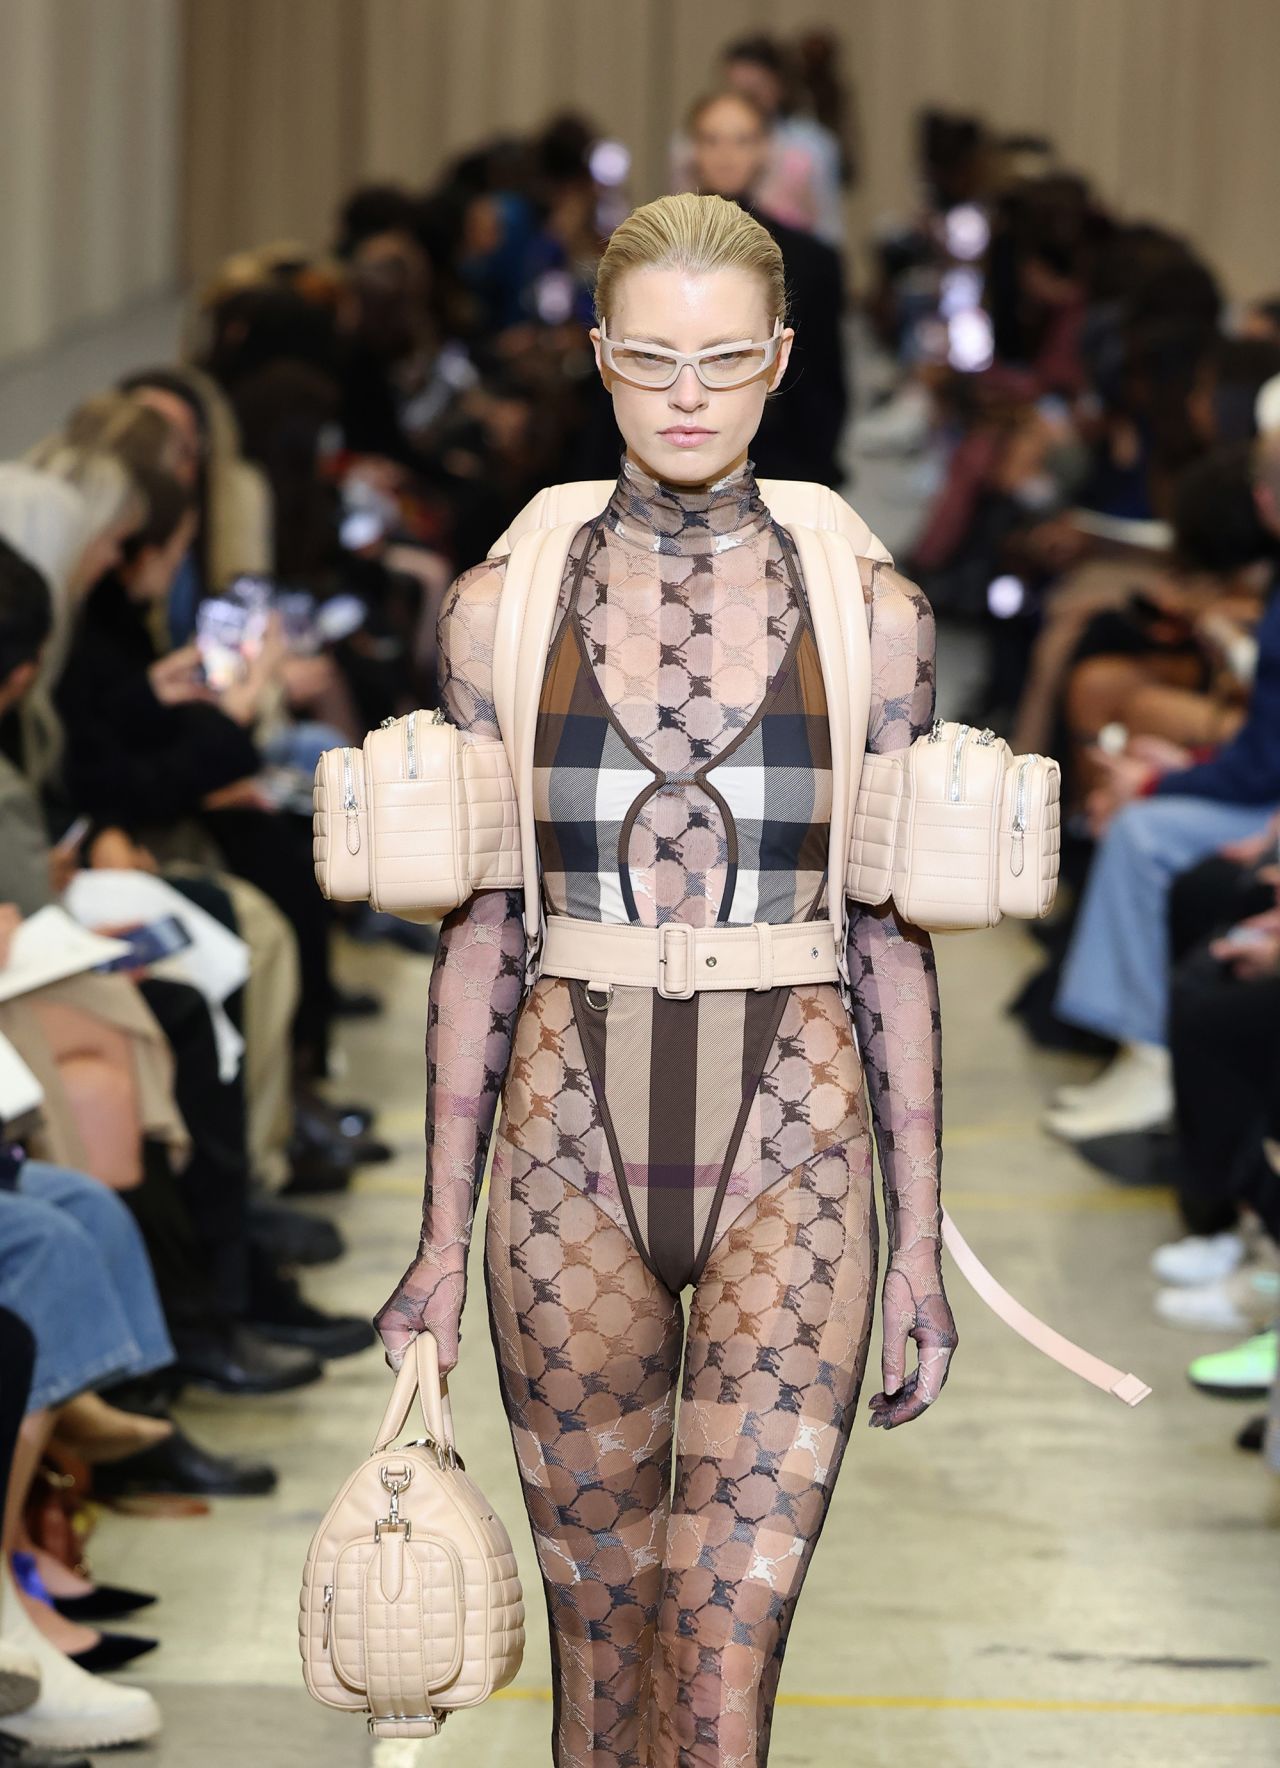 A look from Riccardo Tisci's final Burberry show at London Fashion Week on Monday.